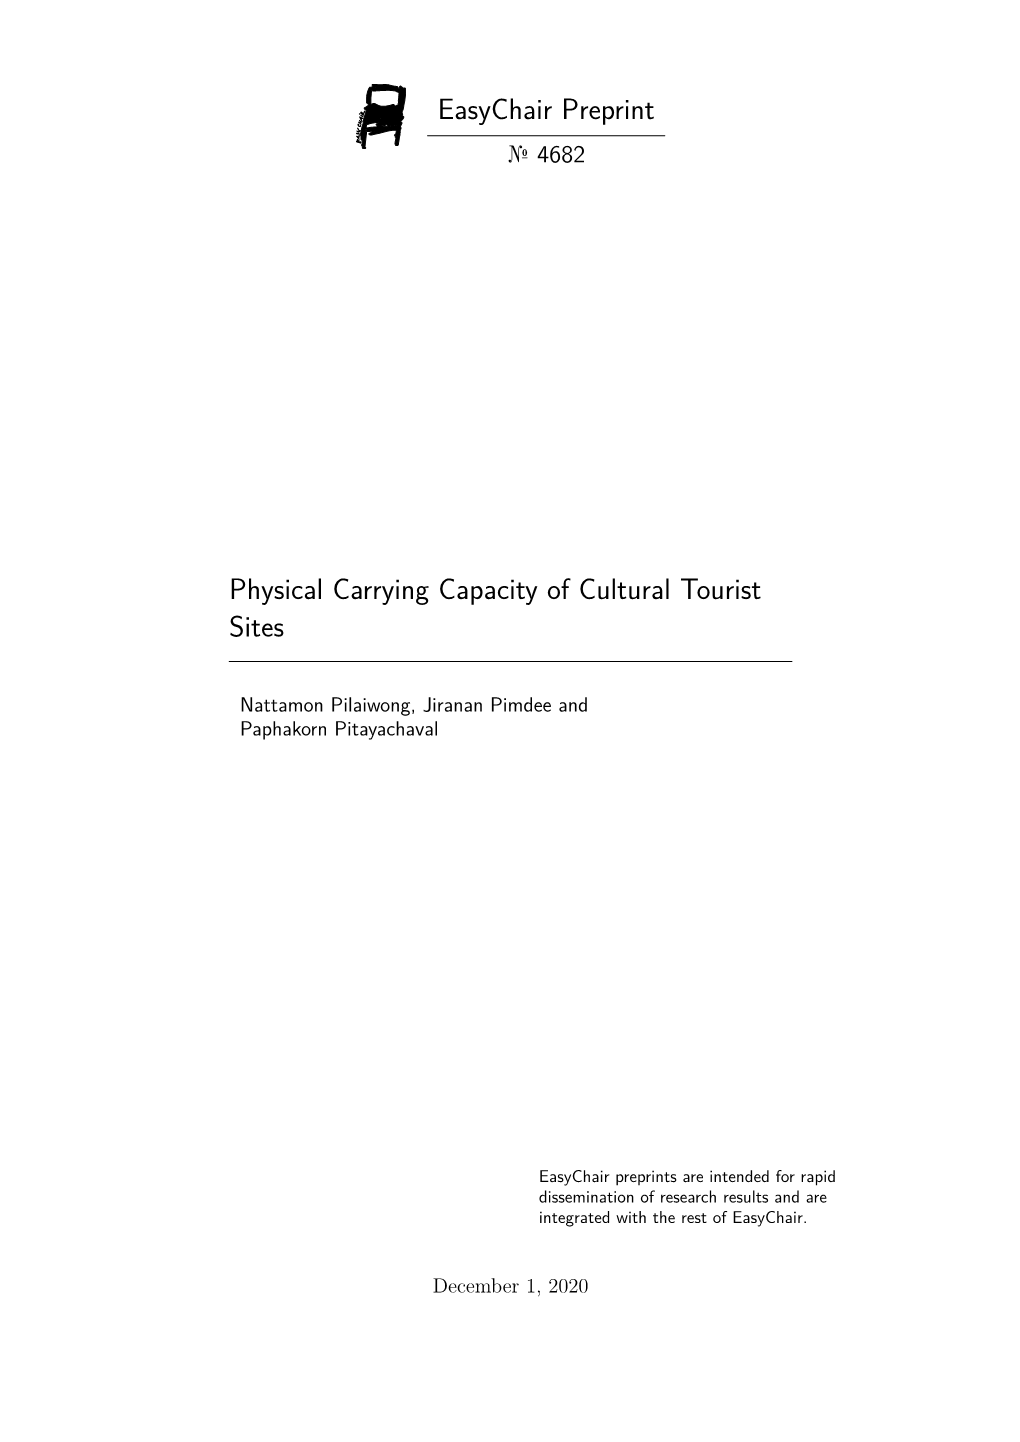 Physical Carrying Capacity of Cultural Tourist Sites